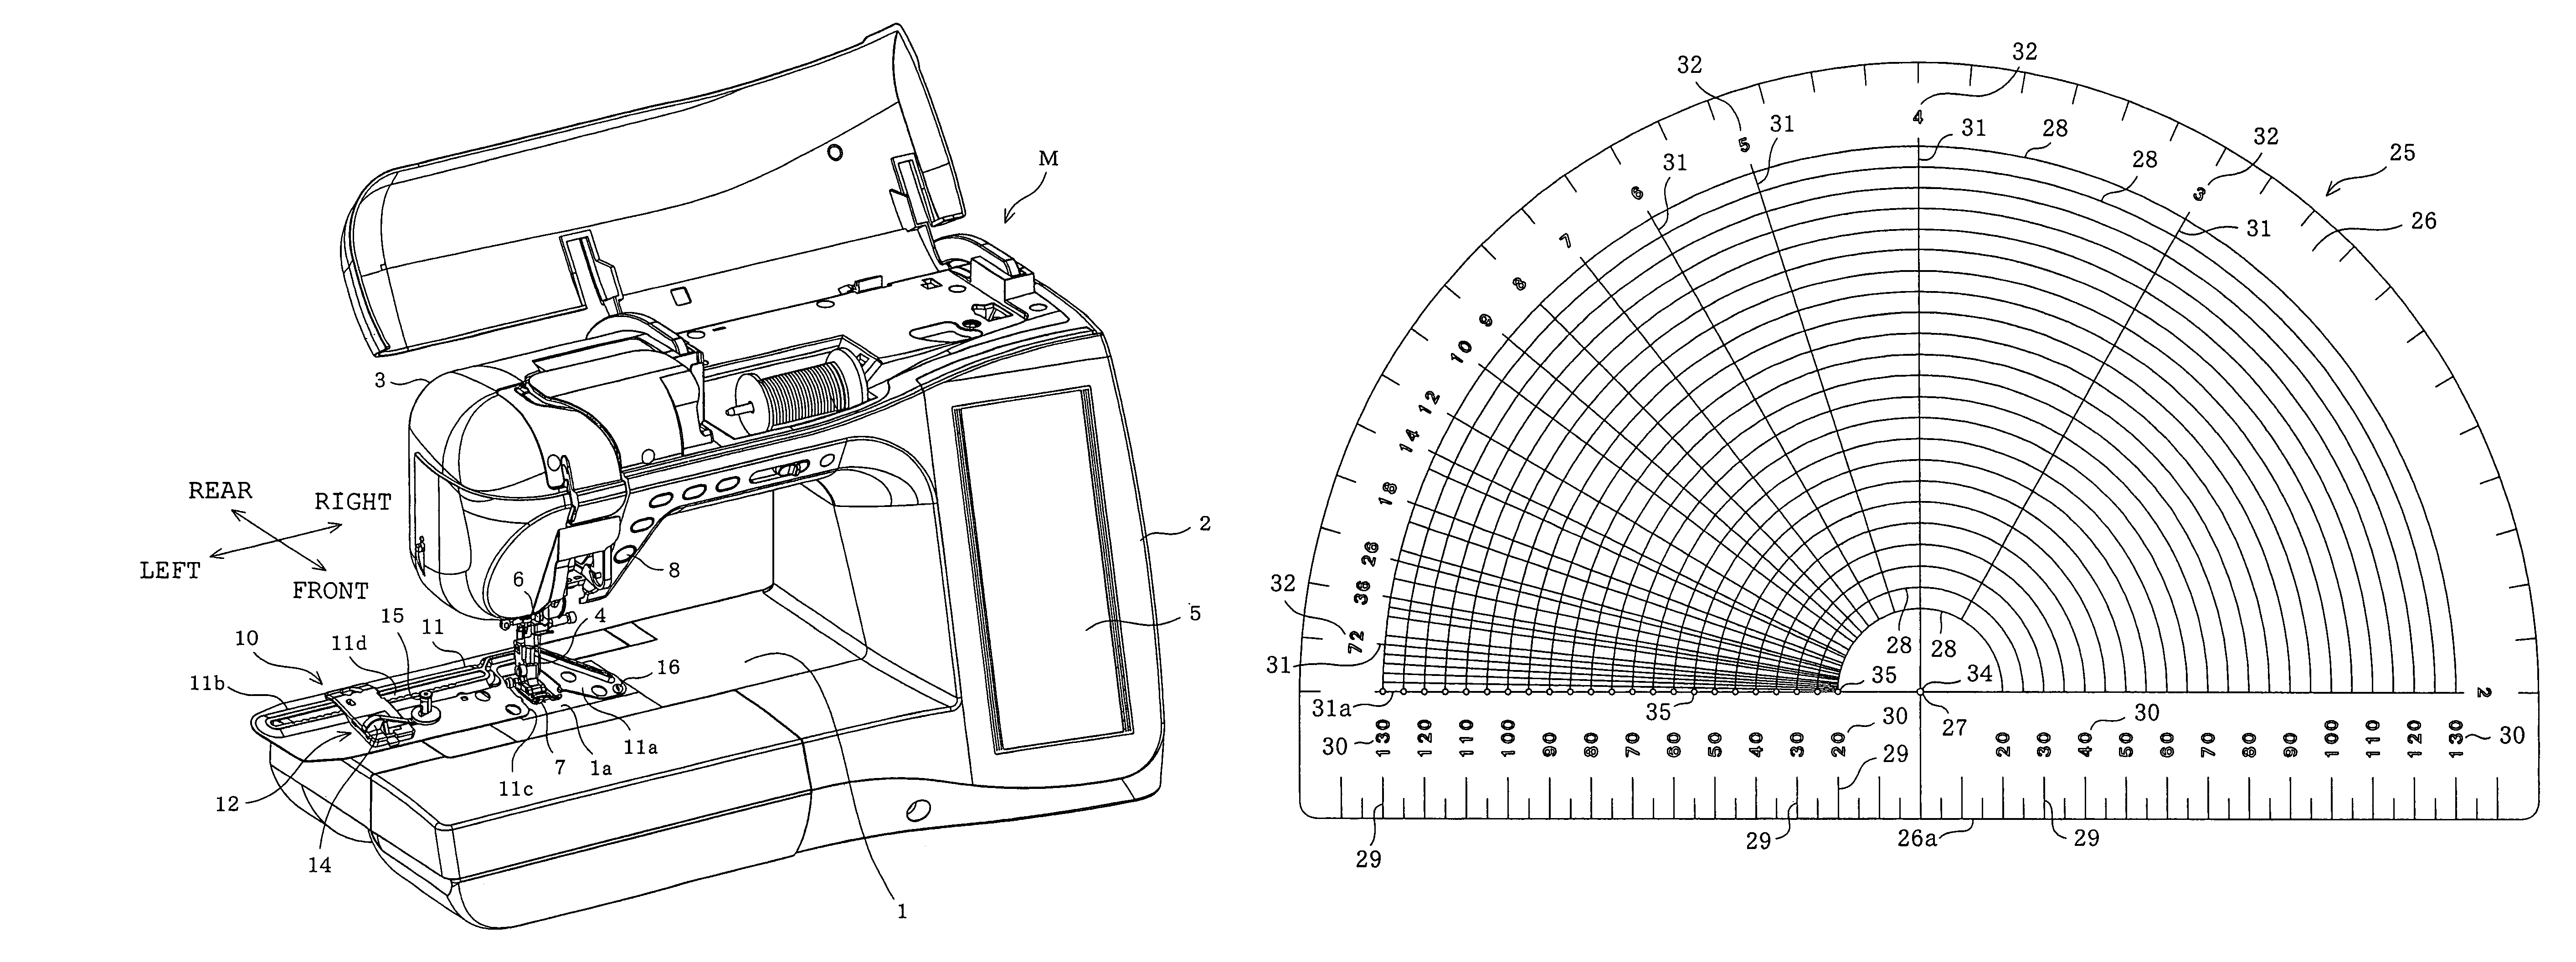 Template for use in circular sewing